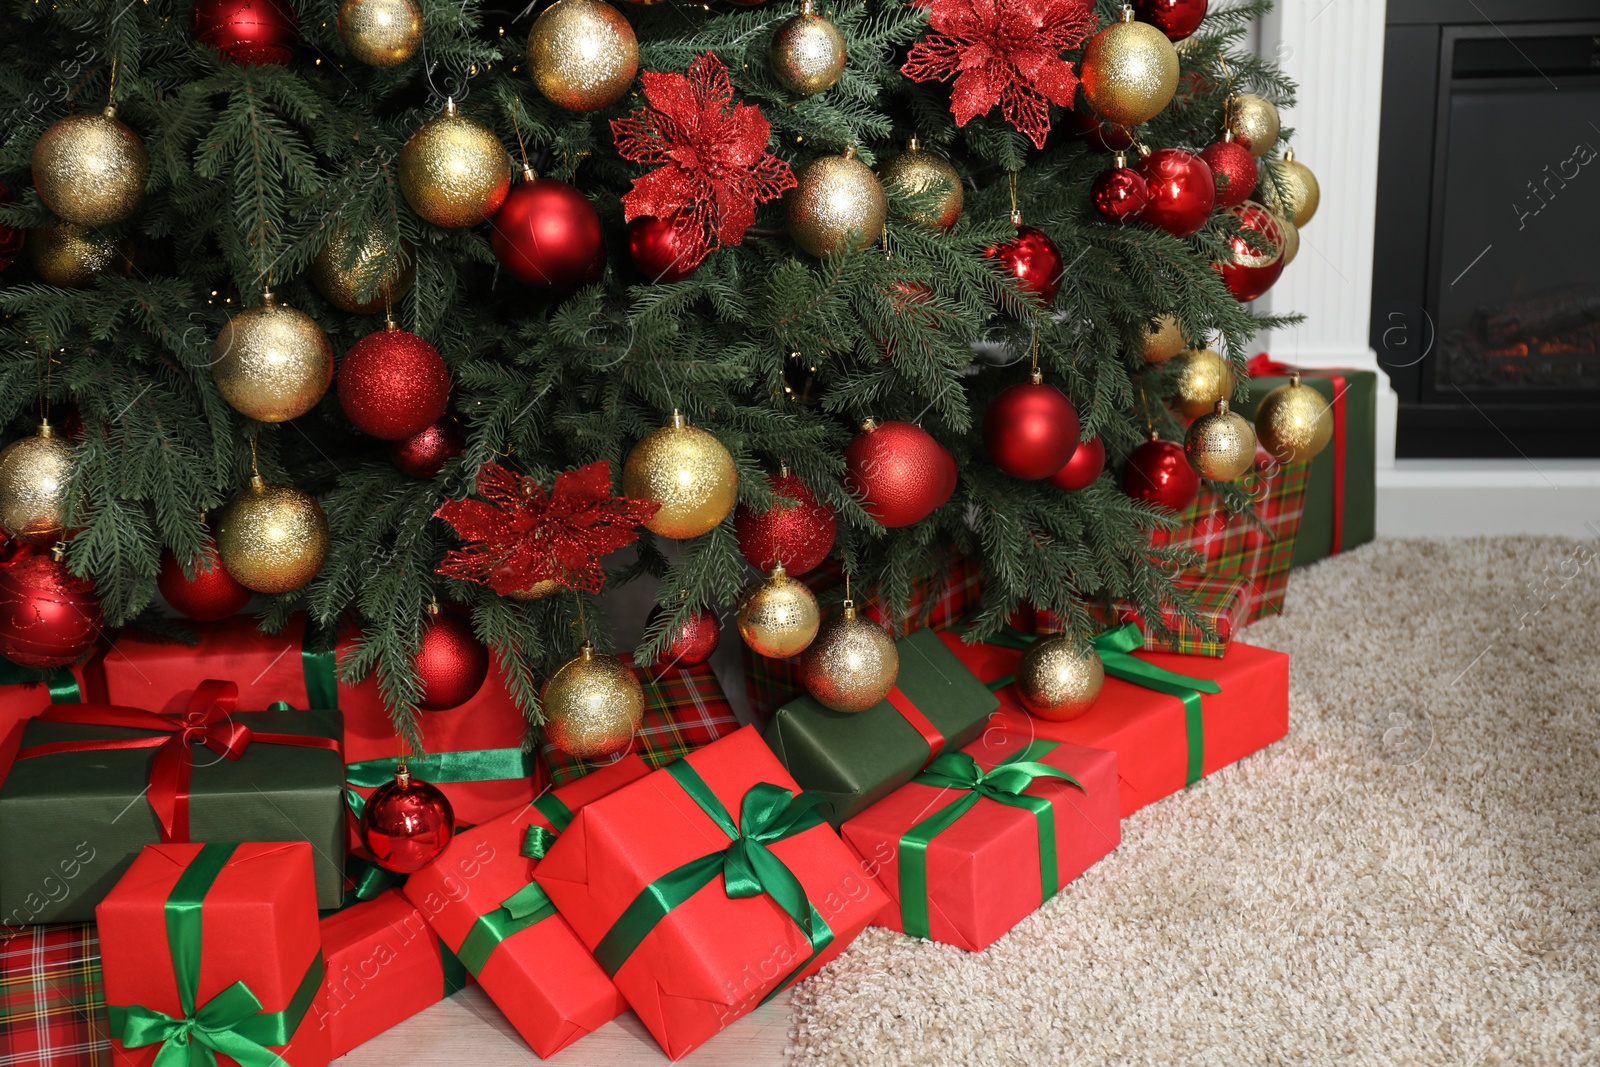 Photo of Many gift boxes under decorated Christmas tree in room